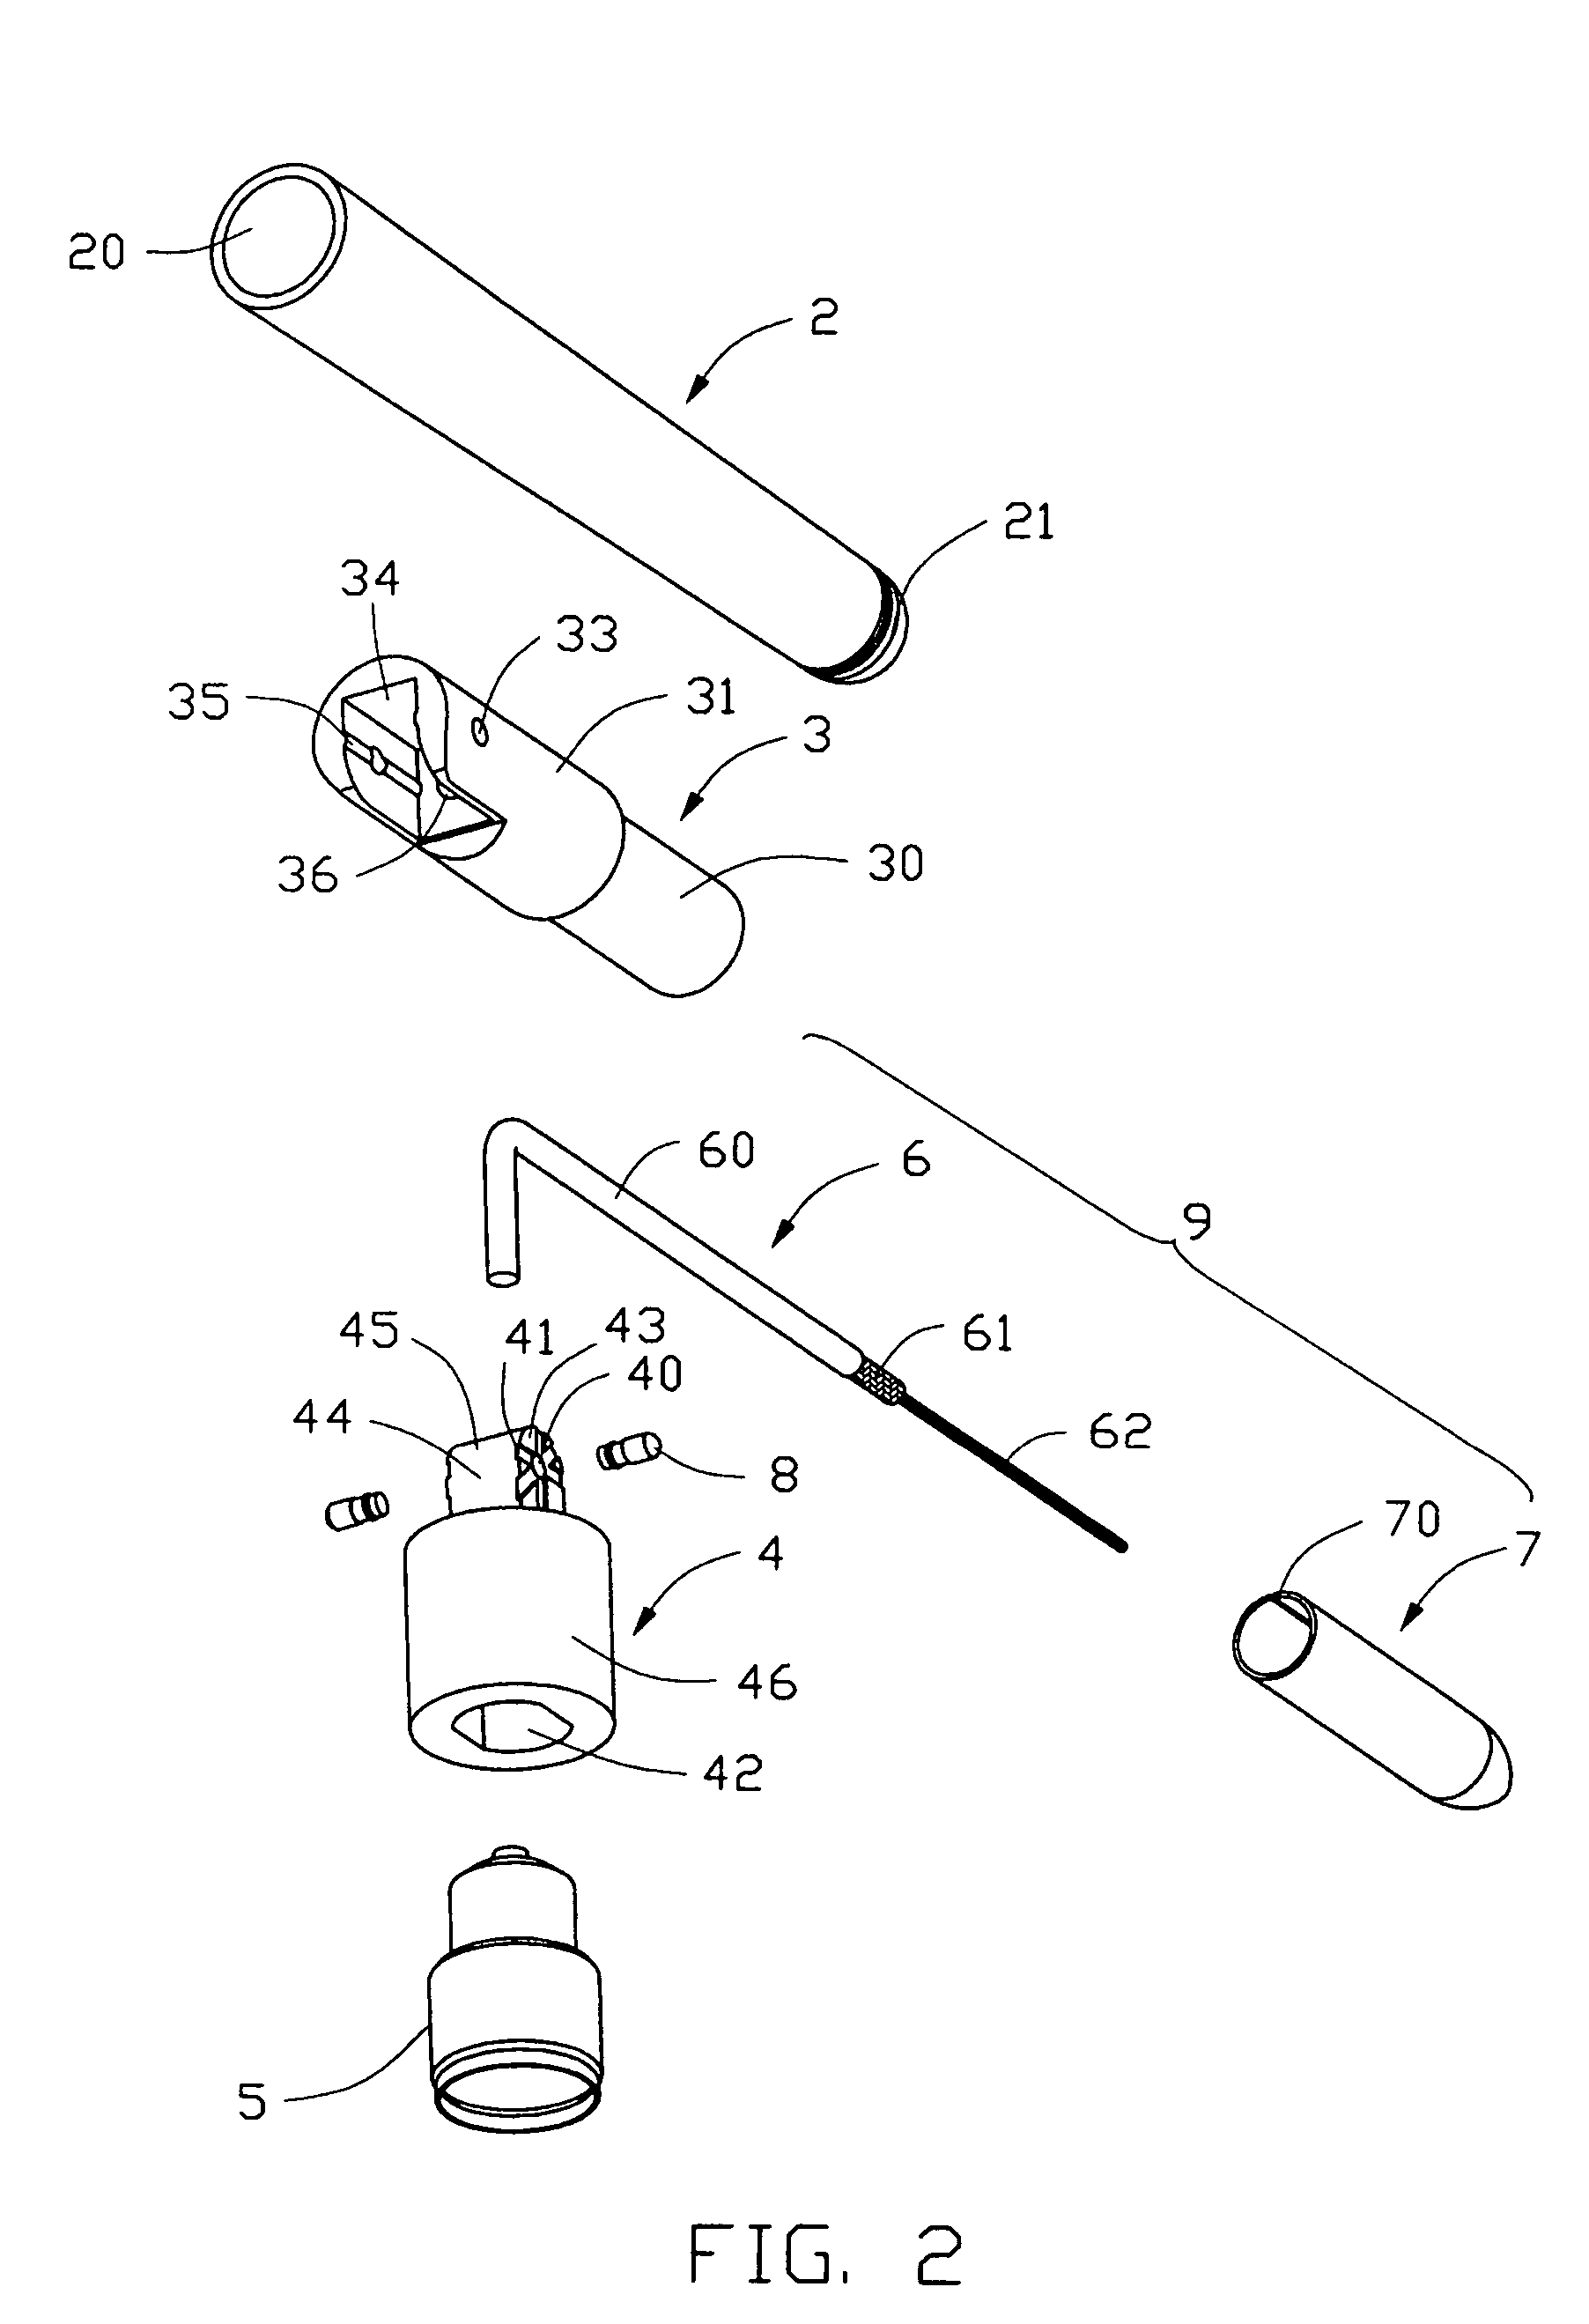 Cable antenna assembly having slots in grounding sleeve